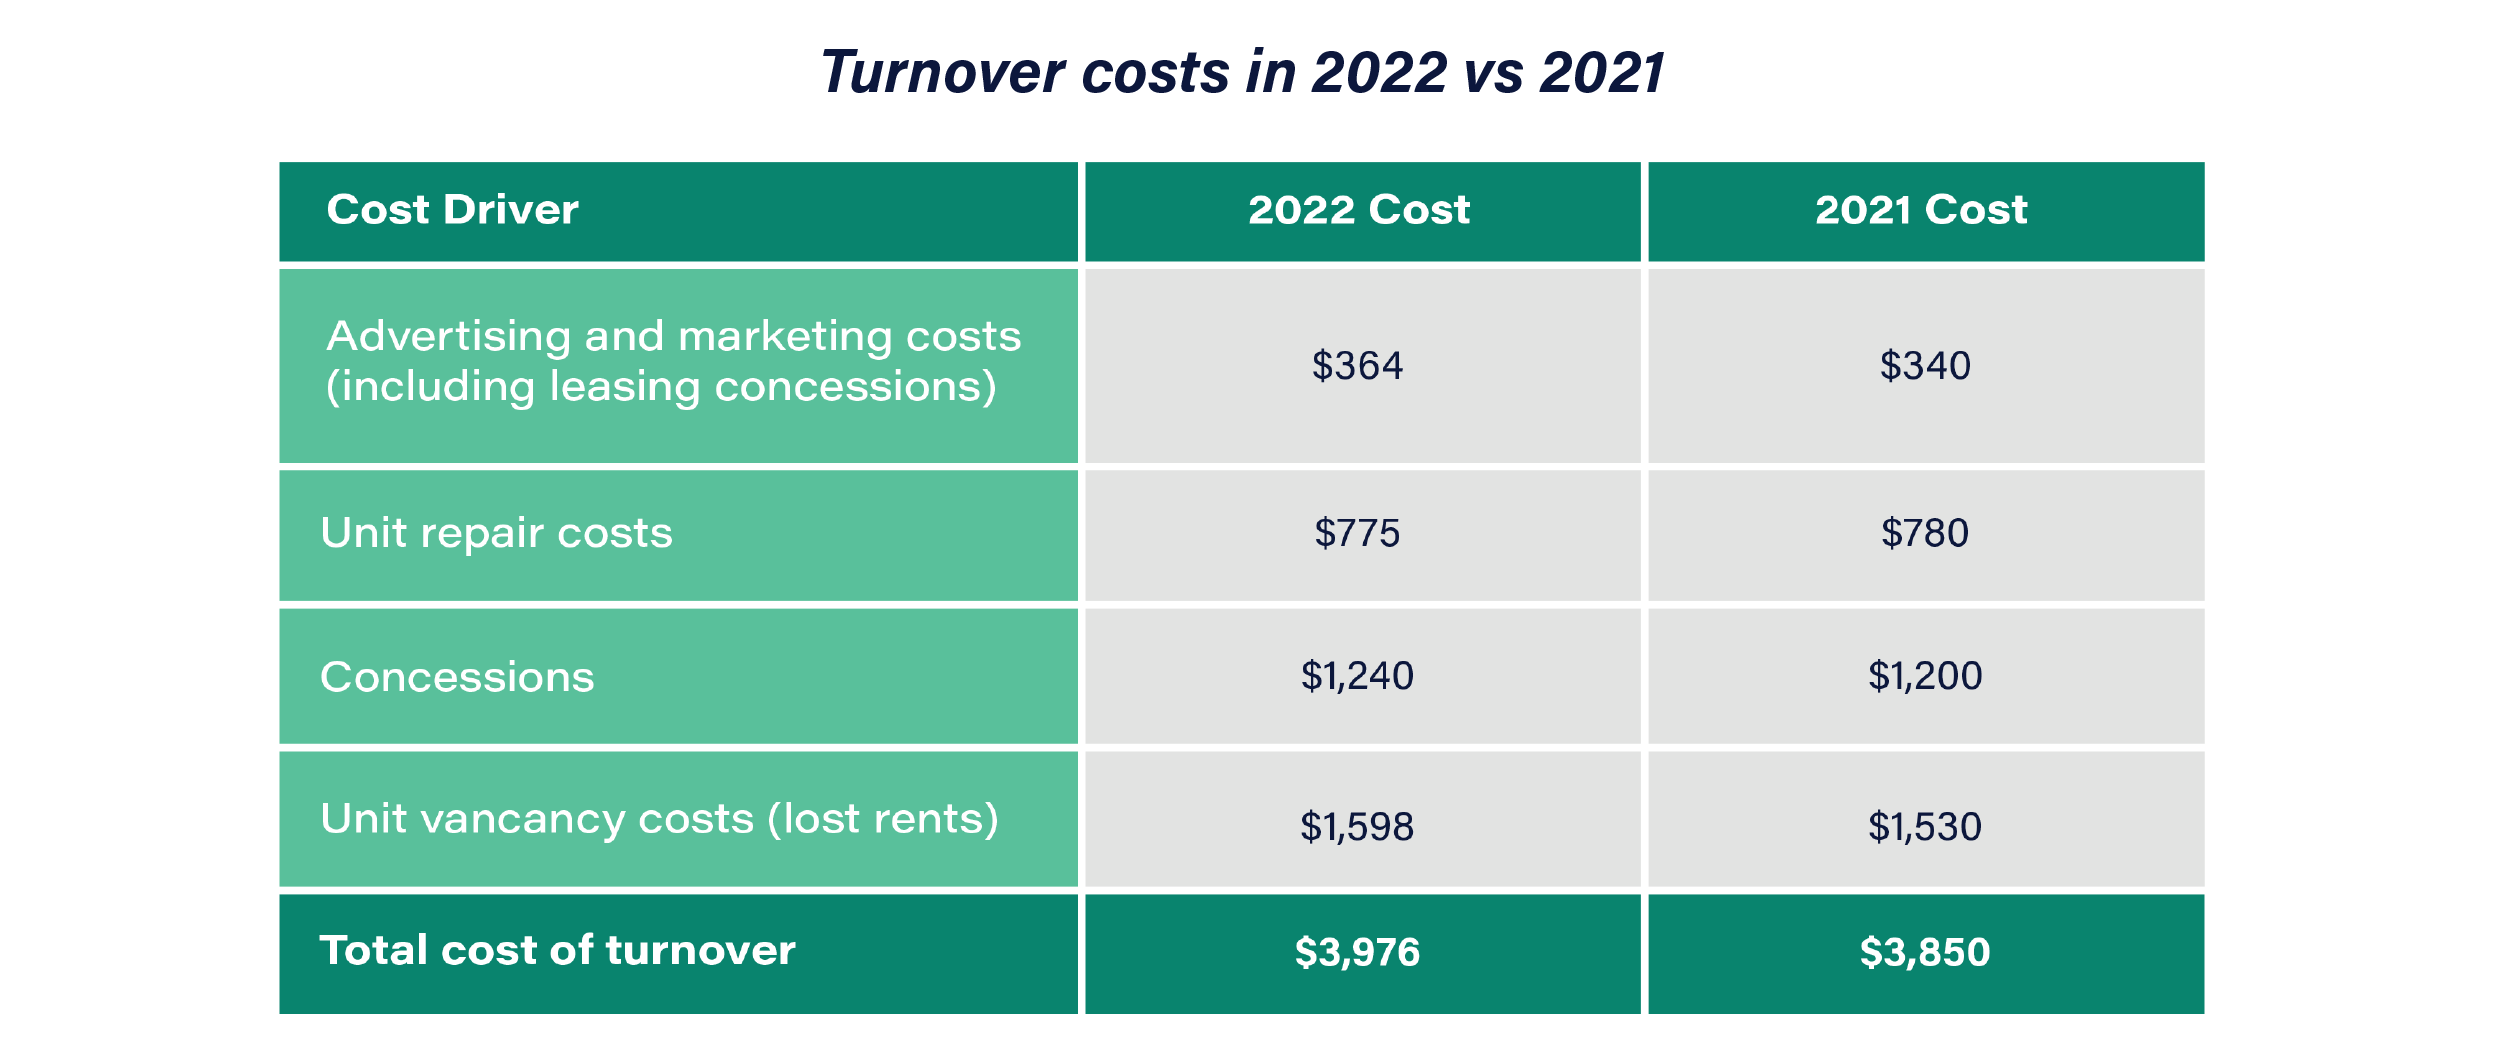 Resident retention for multifamily is important because turnover costs are so high.